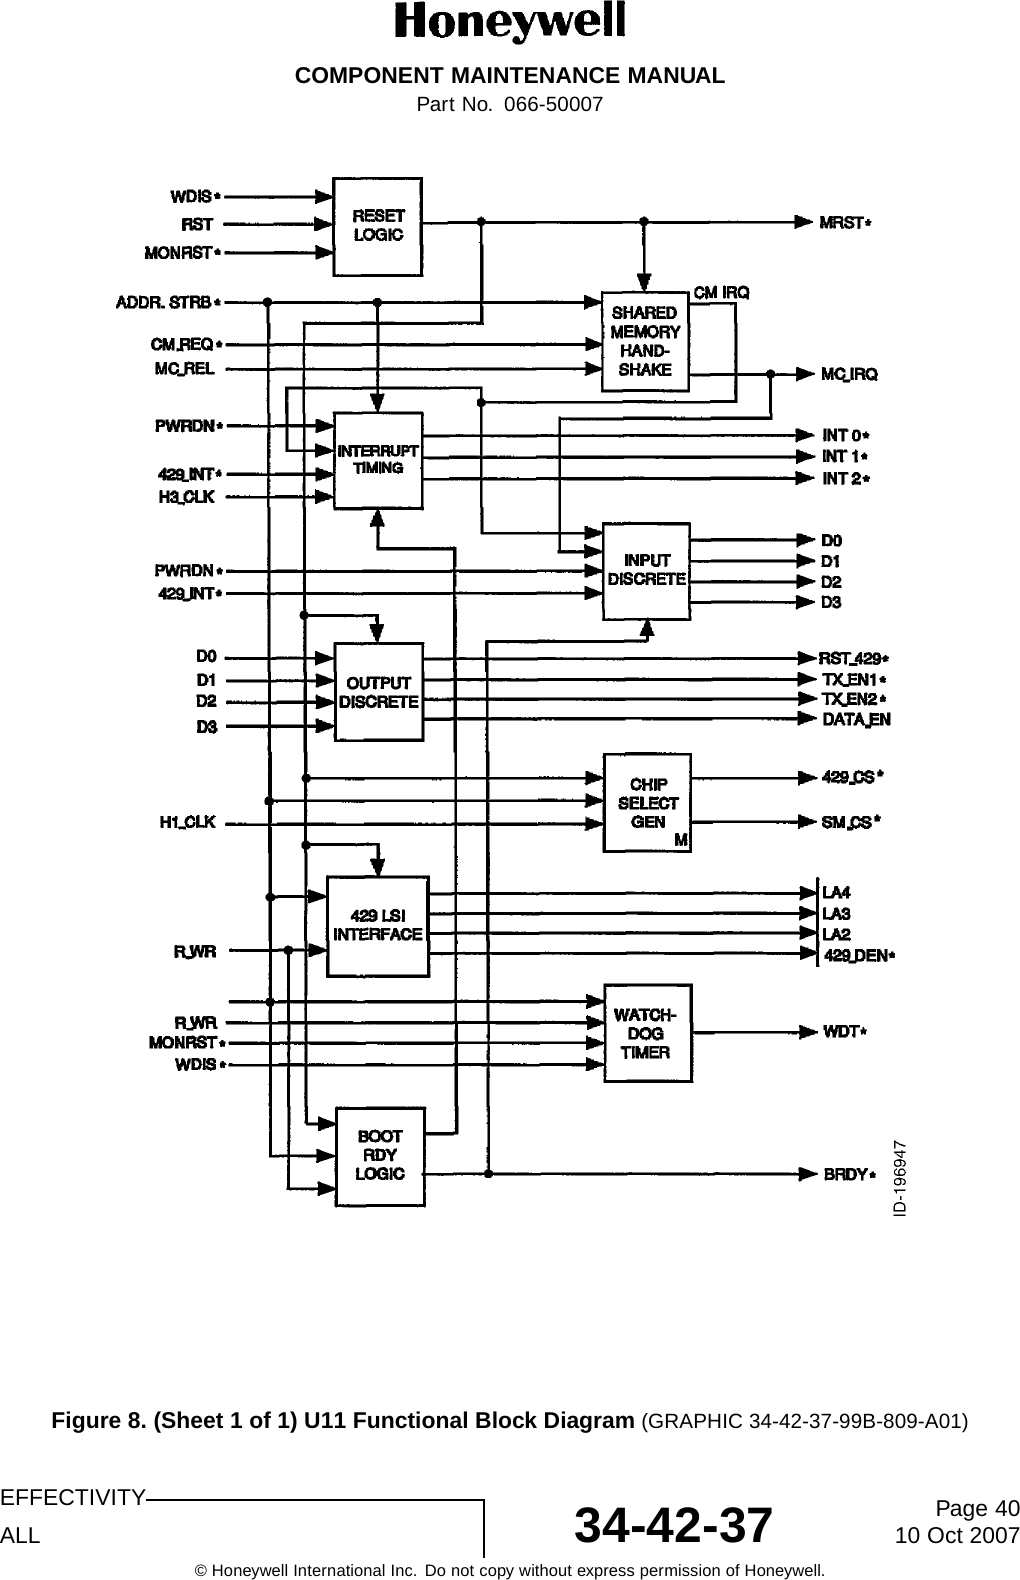 COMPONENT MAINTENANCE MANUALPart No. 066-50007Figure 8. (Sheet 1 of 1) U11 Functional Block Diagram (GRAPHIC 34-42-37-99B-809-A01)EFFECTIVITYALL 34-42-37 Page 4010 Oct 2007© Honeywell International Inc. Do not copy without express permission of Honeywell.